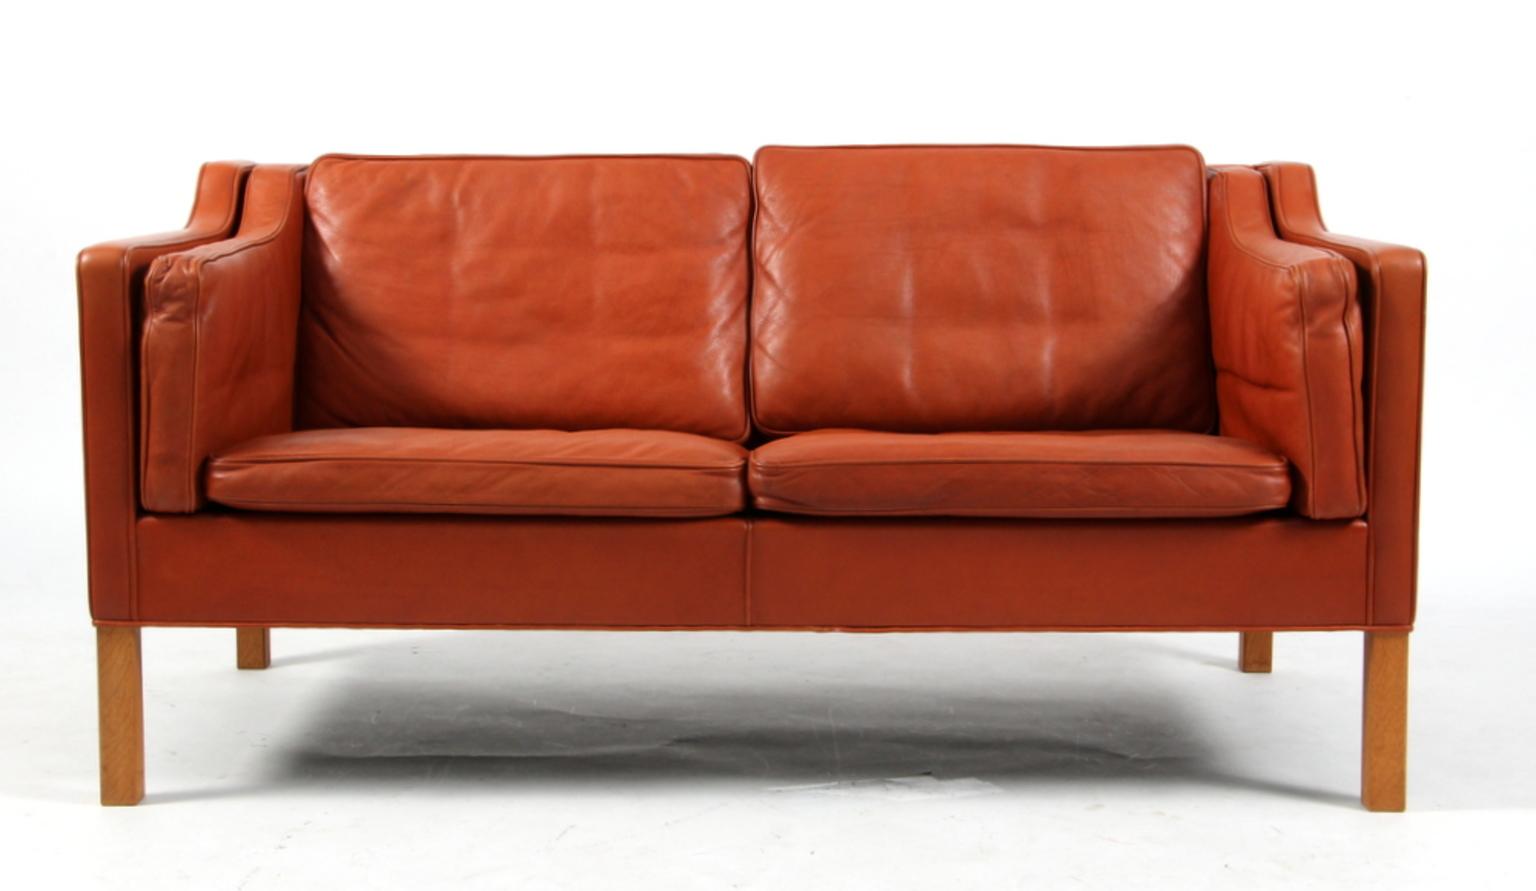 Børge Mogensen two-seat sofa with original leather upholstery.

Legs of oak.

Model 2212, made by Fredericia Furniture.